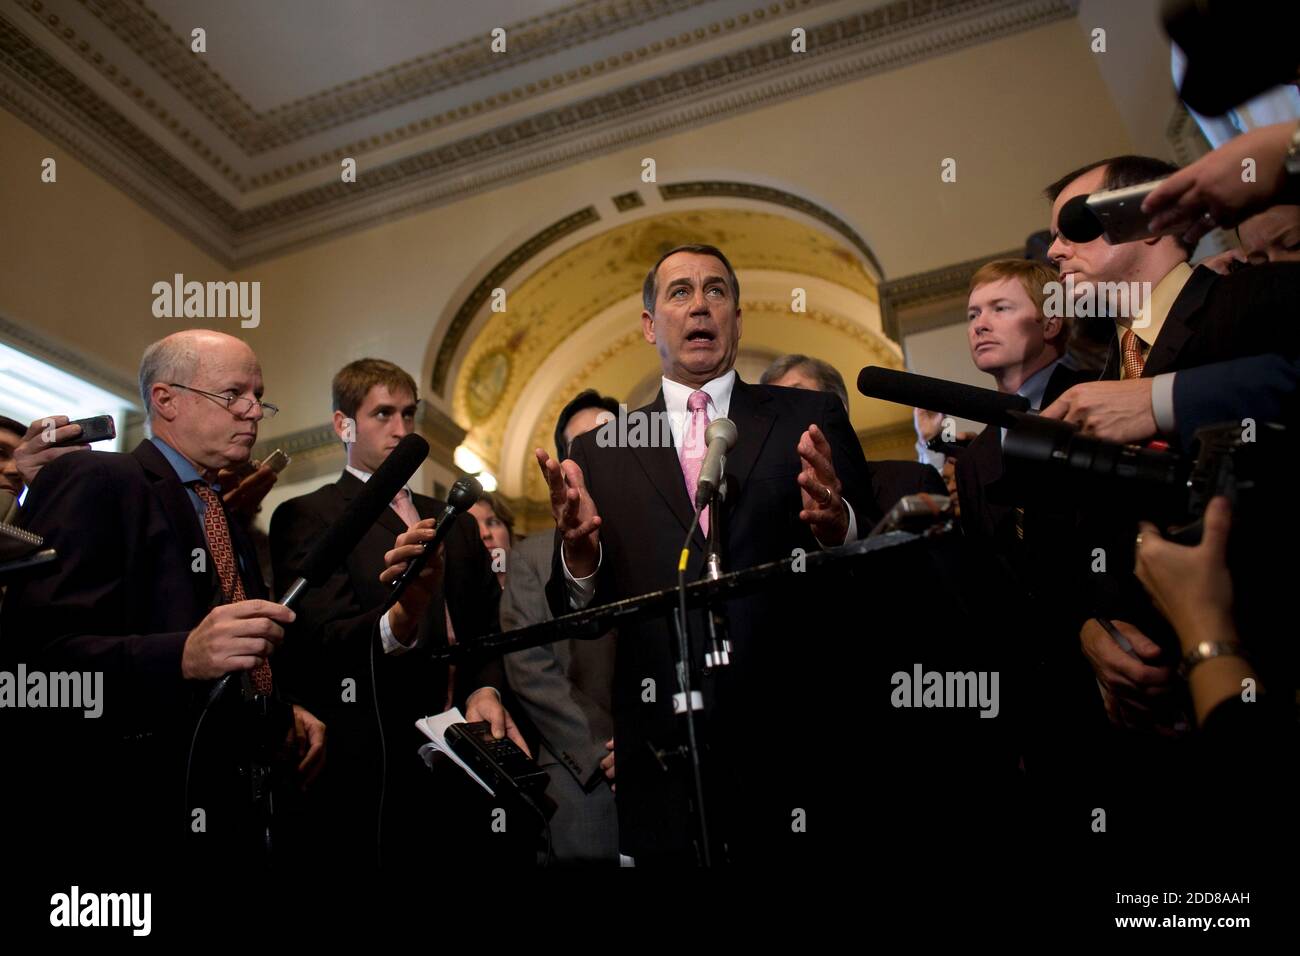 NO FILM, NO VIDEO, NO TV, NO DOCUMENTARY - House Minority Leader John Boehner, R-Ohio (2nd L) standing with (L-R) Rep. Eric Cantor, R-Va., House Minority Whip Roy Blunt, R-Mo., and Rep. Adam Putnam, R-Fla., speaks to reporters on Capitol Hill in Washington, DC, USA on Monday, September 29, 2008, after the House vote on the financial bailout package failed. The U.S. House of Representatives on Monday rejected a Wall Street bailout bill that would have authorized the Treasury Department to spend up to $700 billion to purchase soured mortgage-backed assets from banks with the goal of jump-startin Stock Photo